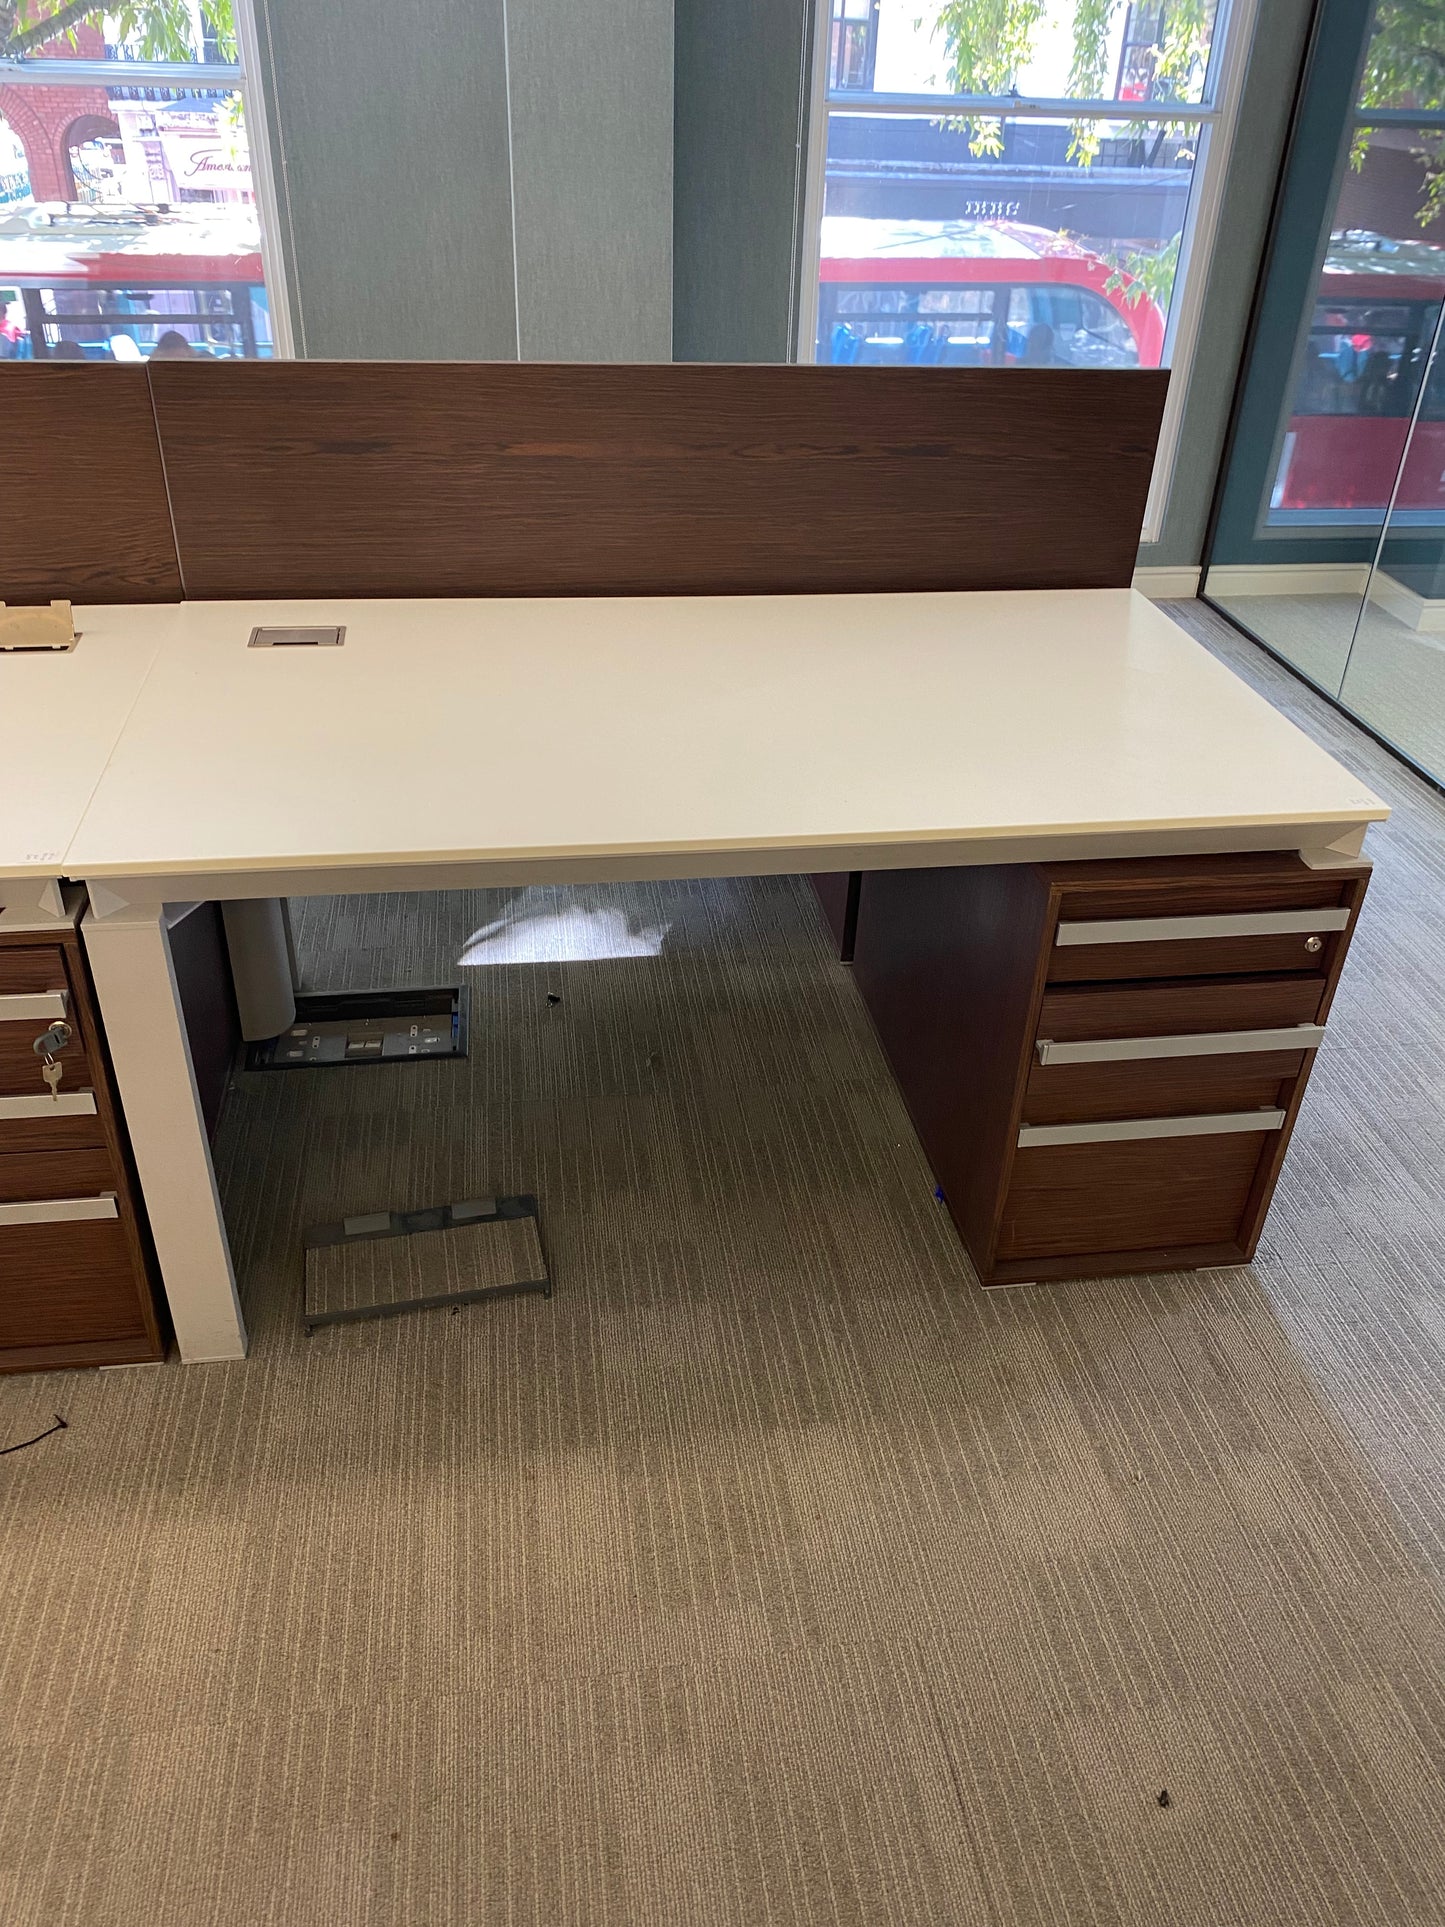 White office table with walnut divider and storagein office with large windows 